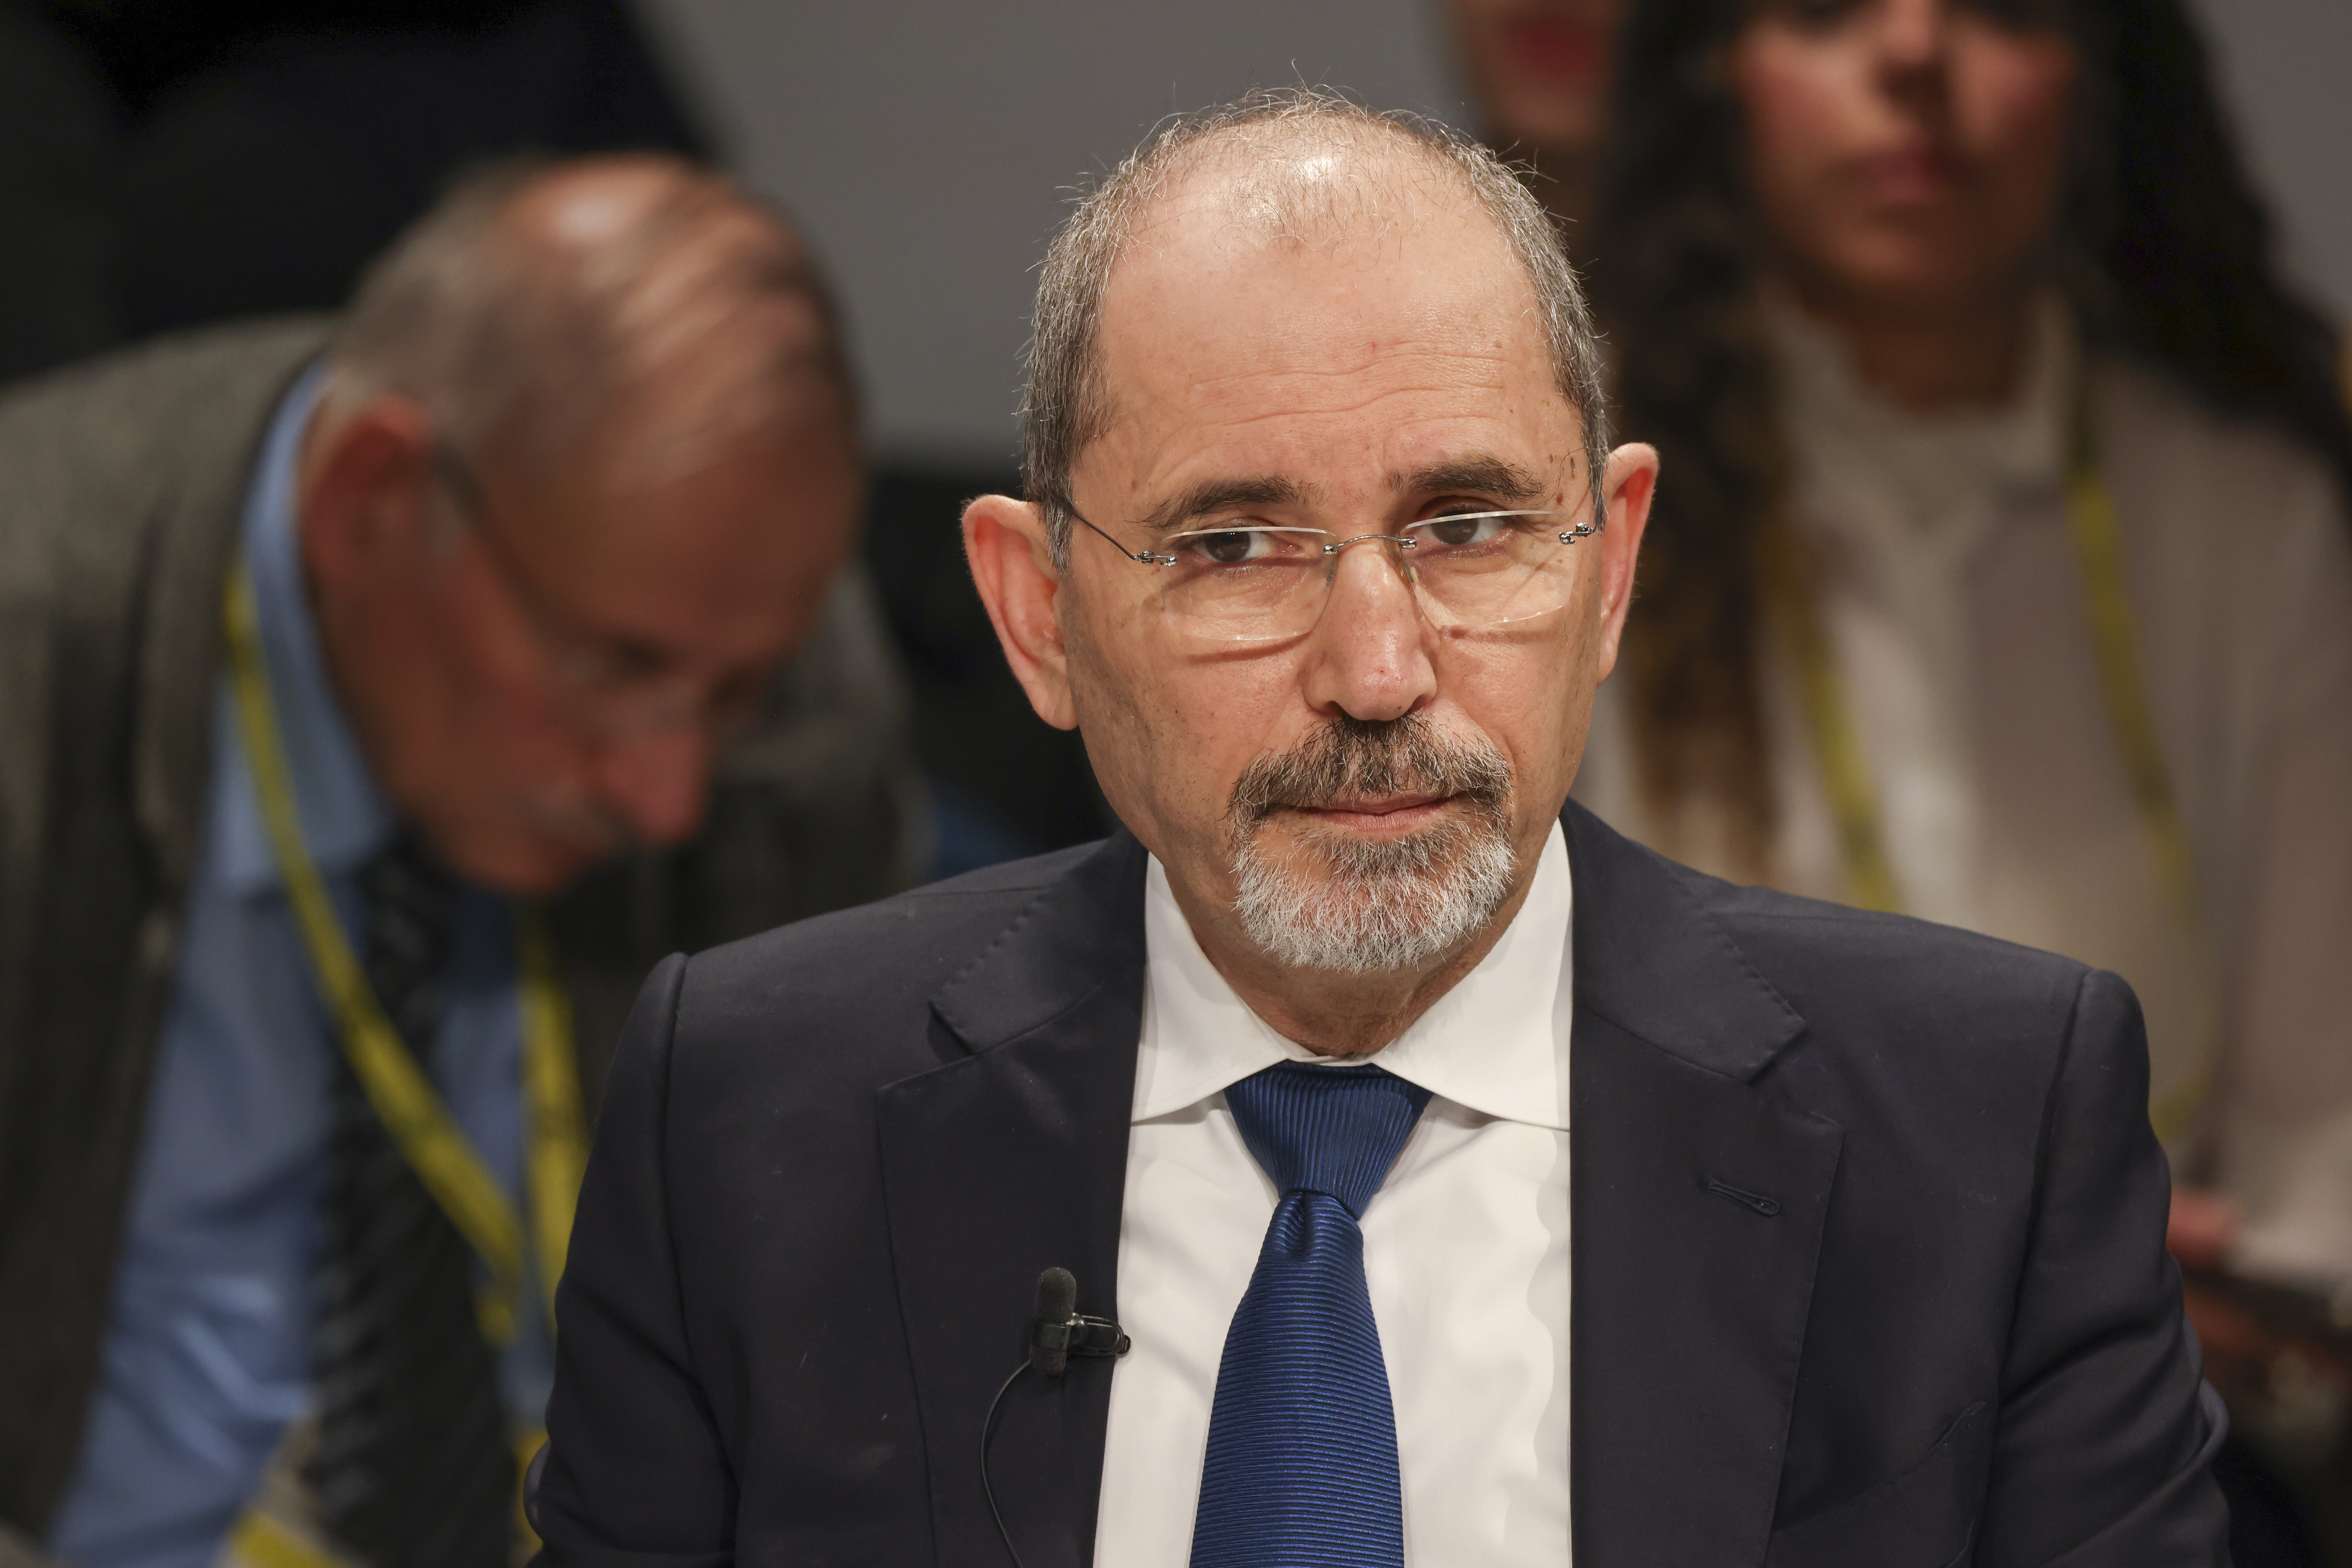 Jordan's Foreign Minister Ayman Safadi takes part in a townhall during the Munich Security Conference in Munich, Germany, on February 18.